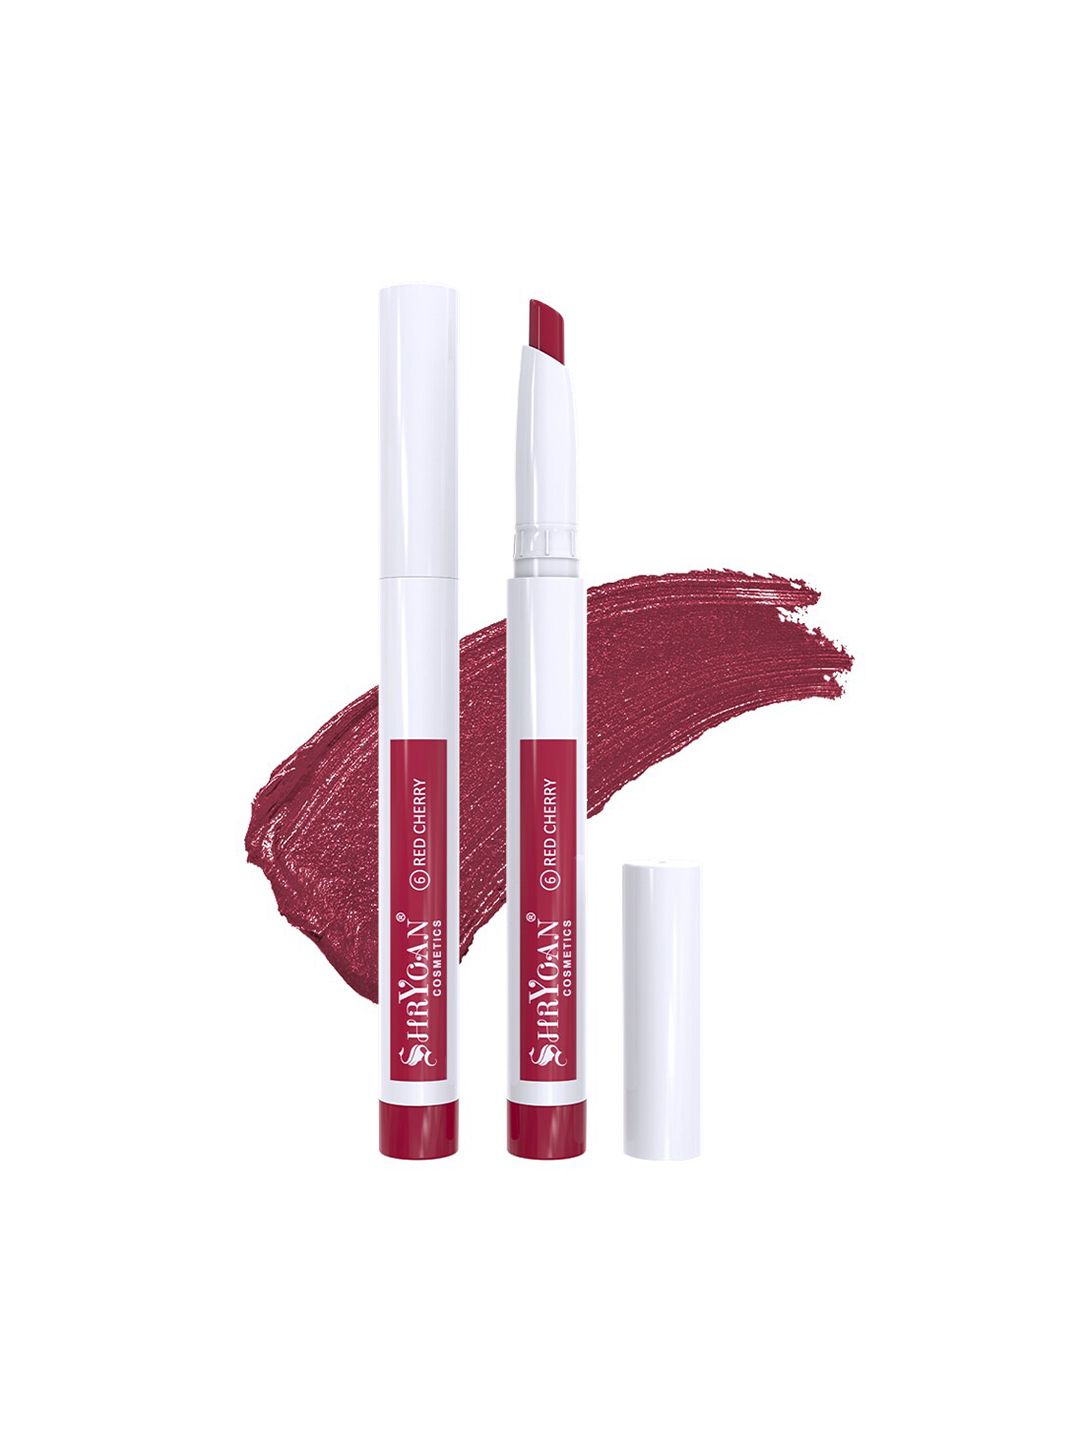 SHRYOAN Non-Transfer 24 Hours Lipstick - Red Cherry SYNT-005 Price in India